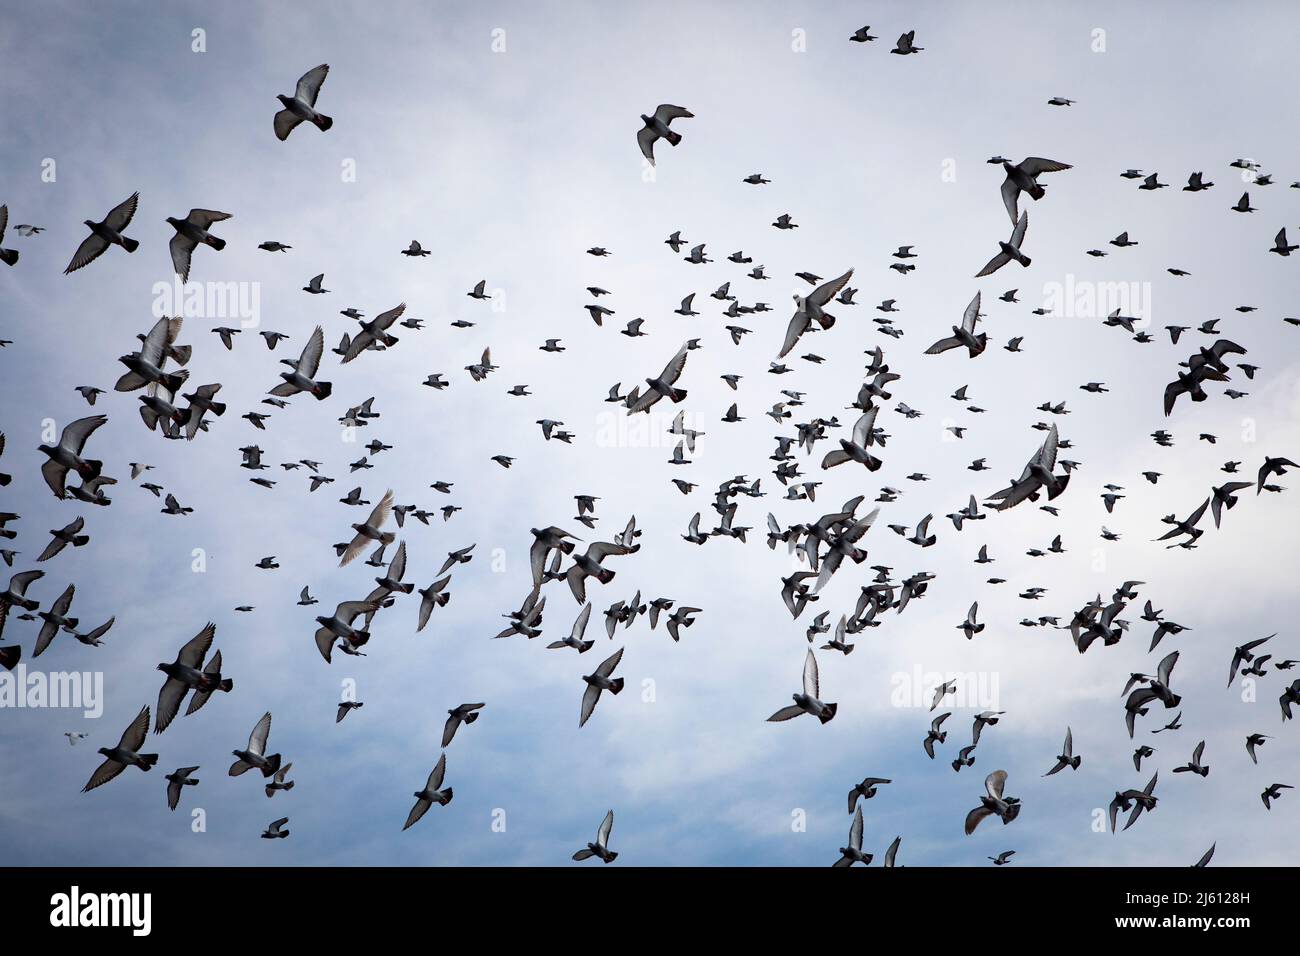 flock of speed racing pigeon flying against cloudy sky Stock Photo